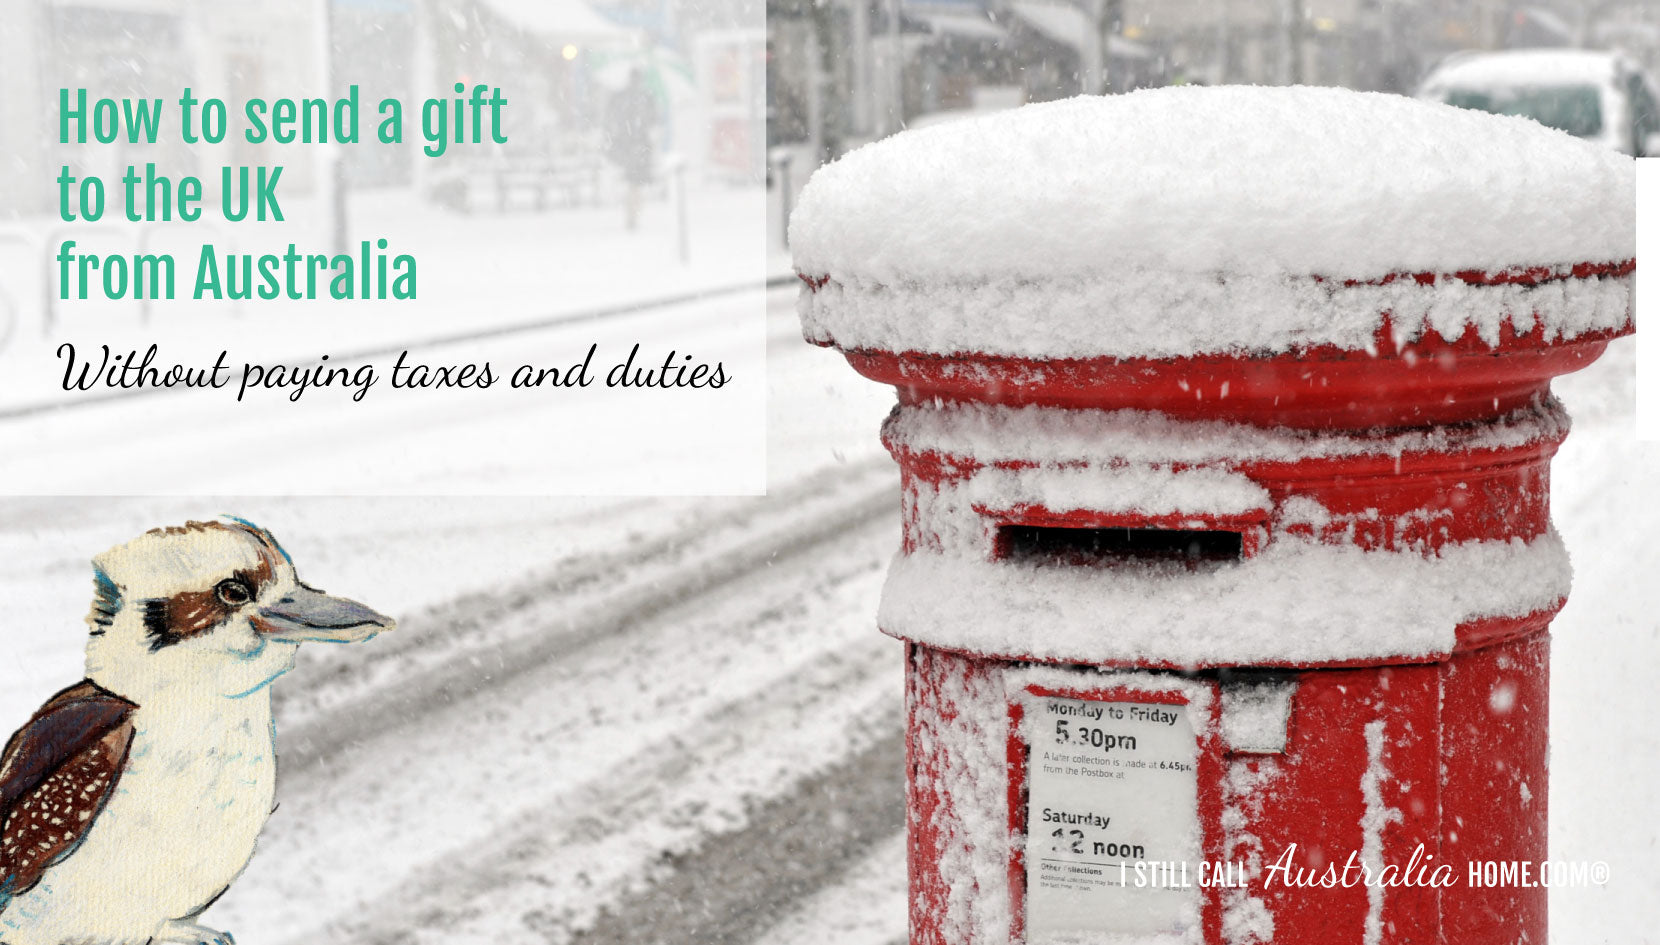 HOW TO SEND A GIFT TO THE UK FROM AUSTRALIA WITHOUT PAYING TAXES AND DUTIES